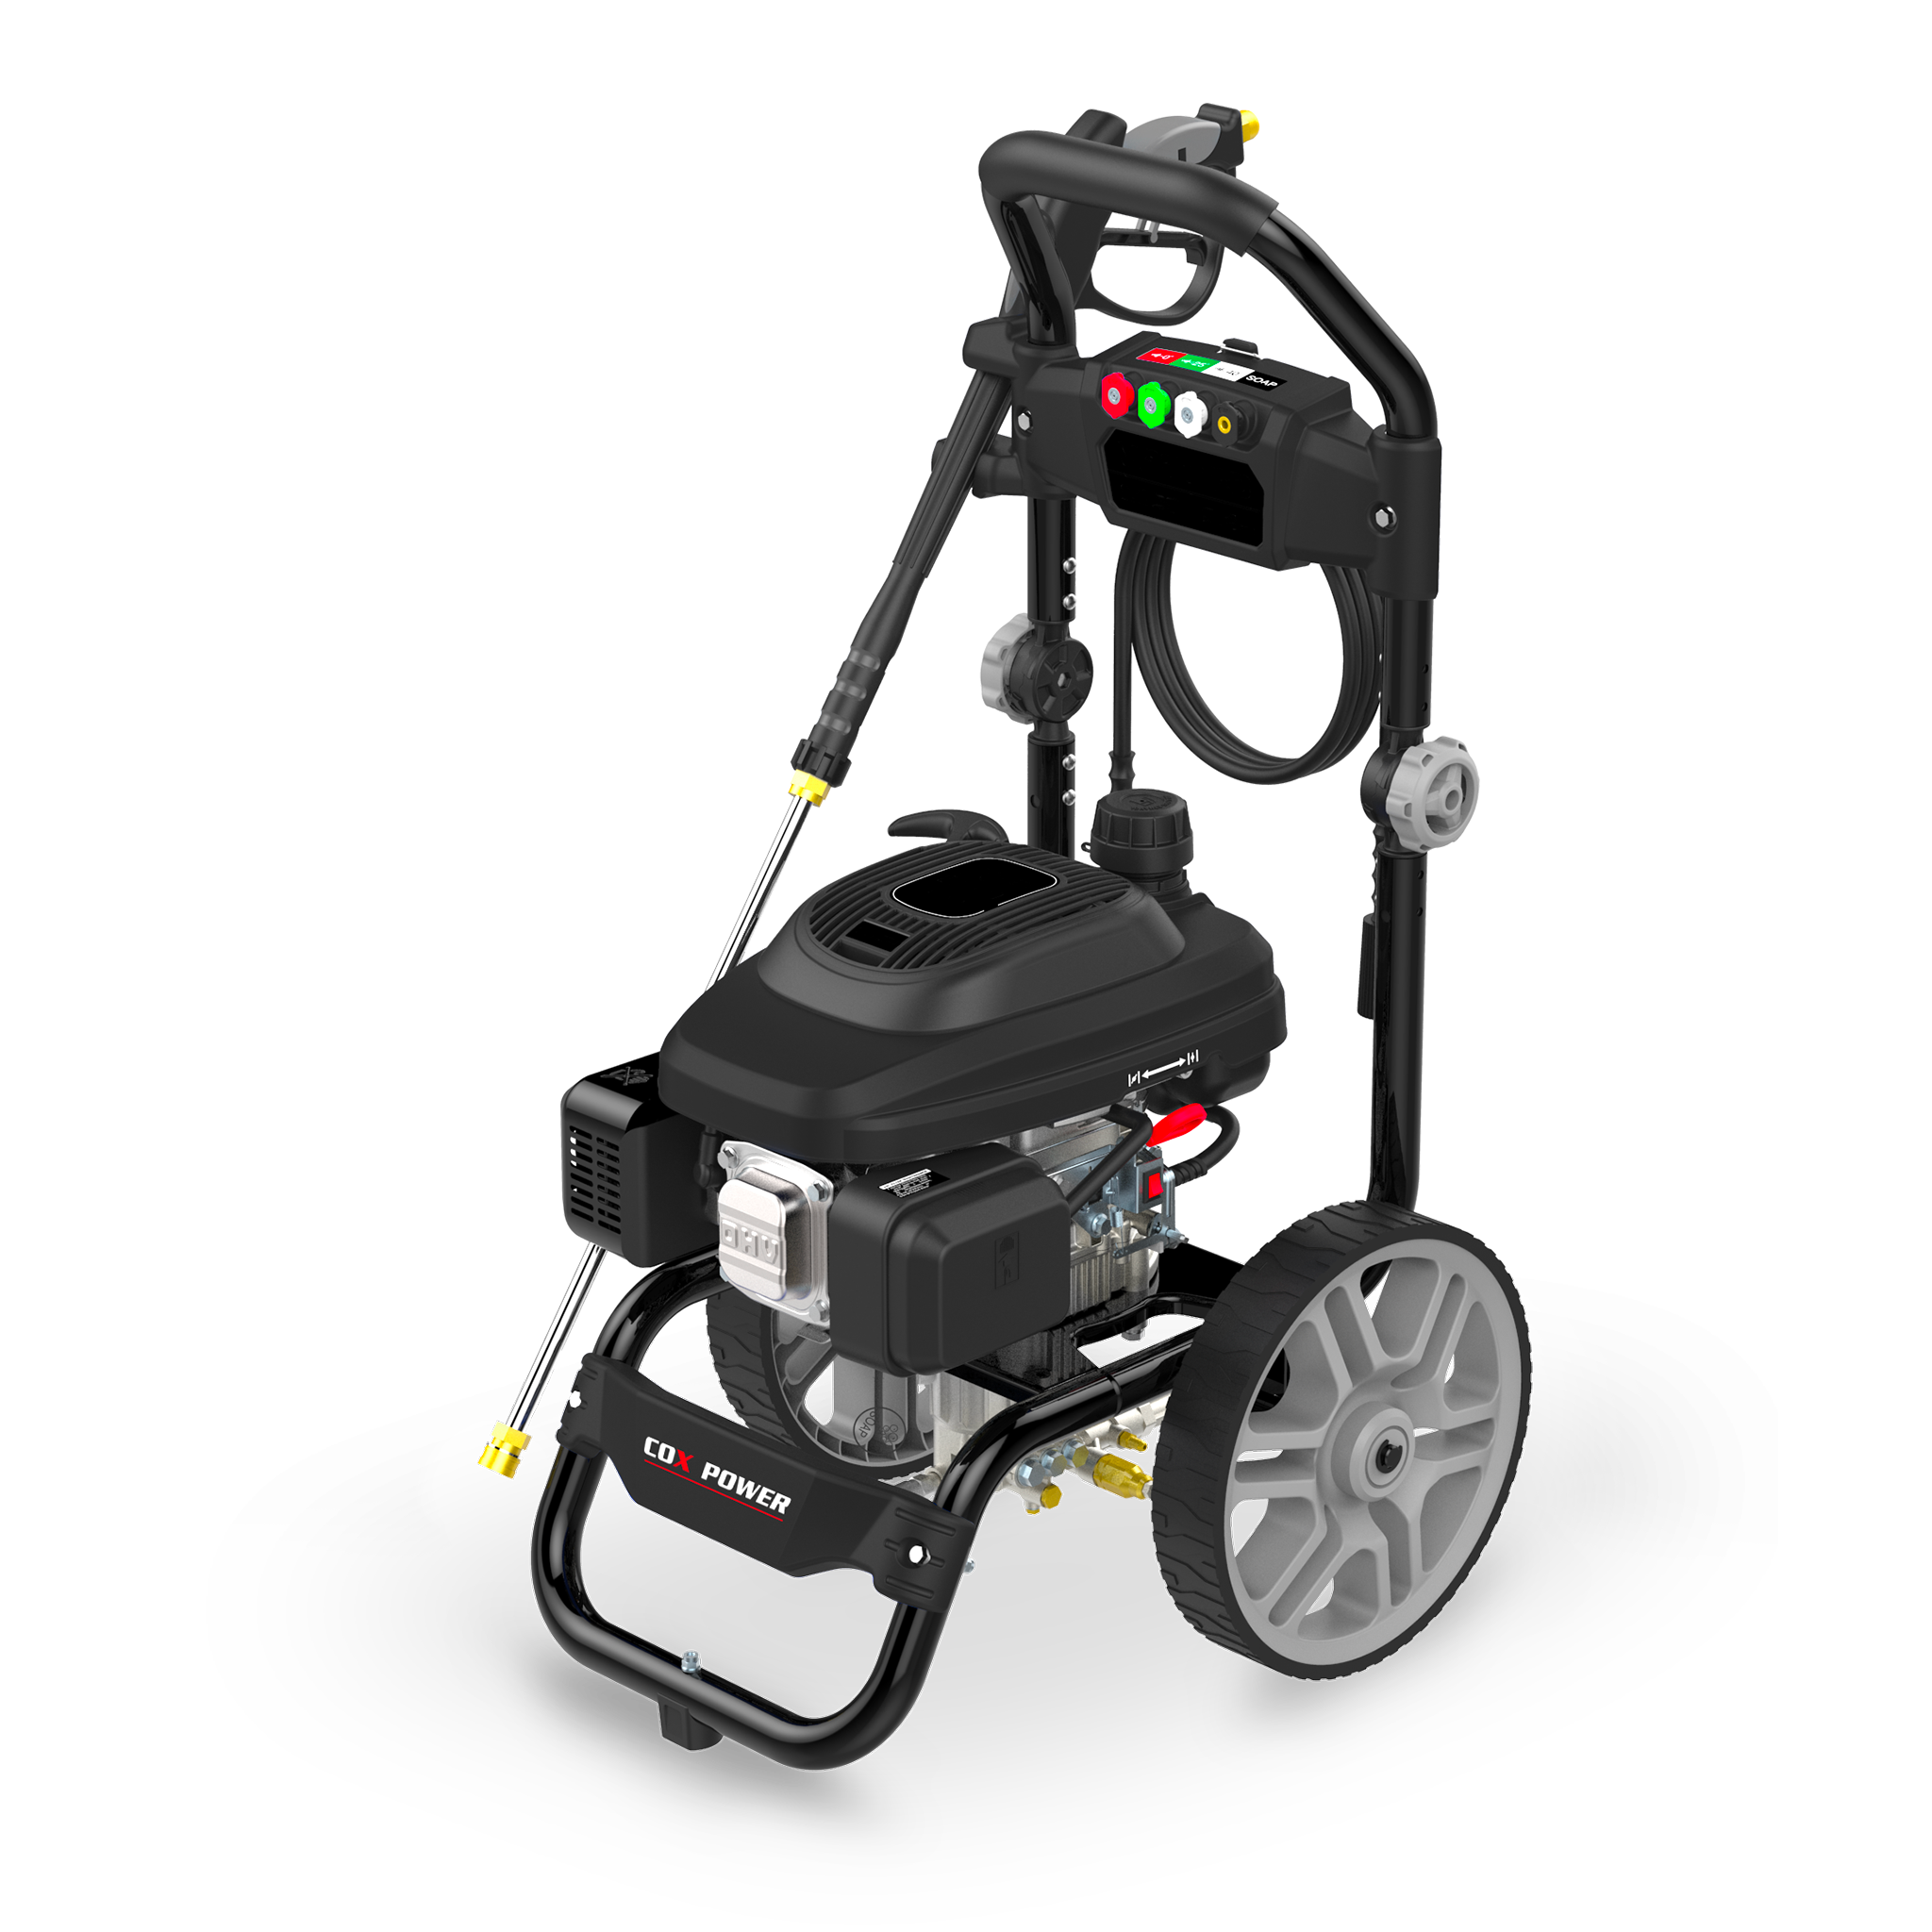 COX Power product image of a high pressure series pressure washer 2500psi